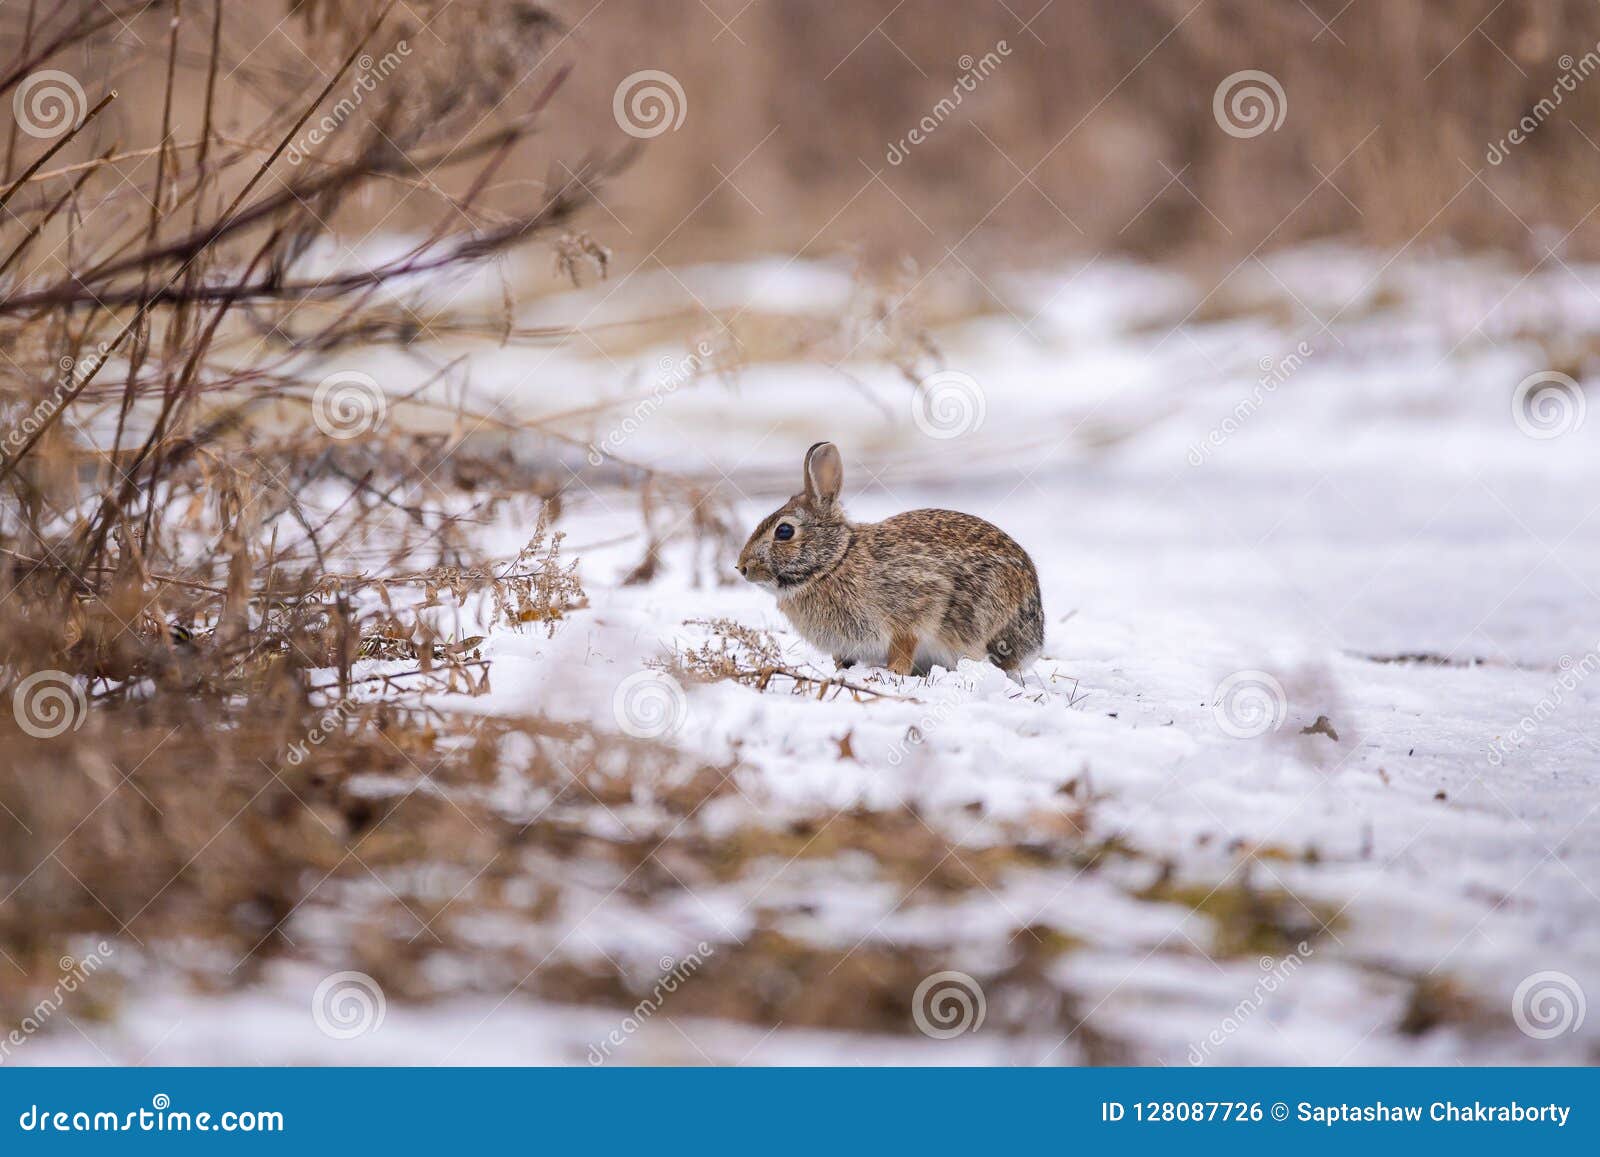 eastern cottontail rabbit in snow